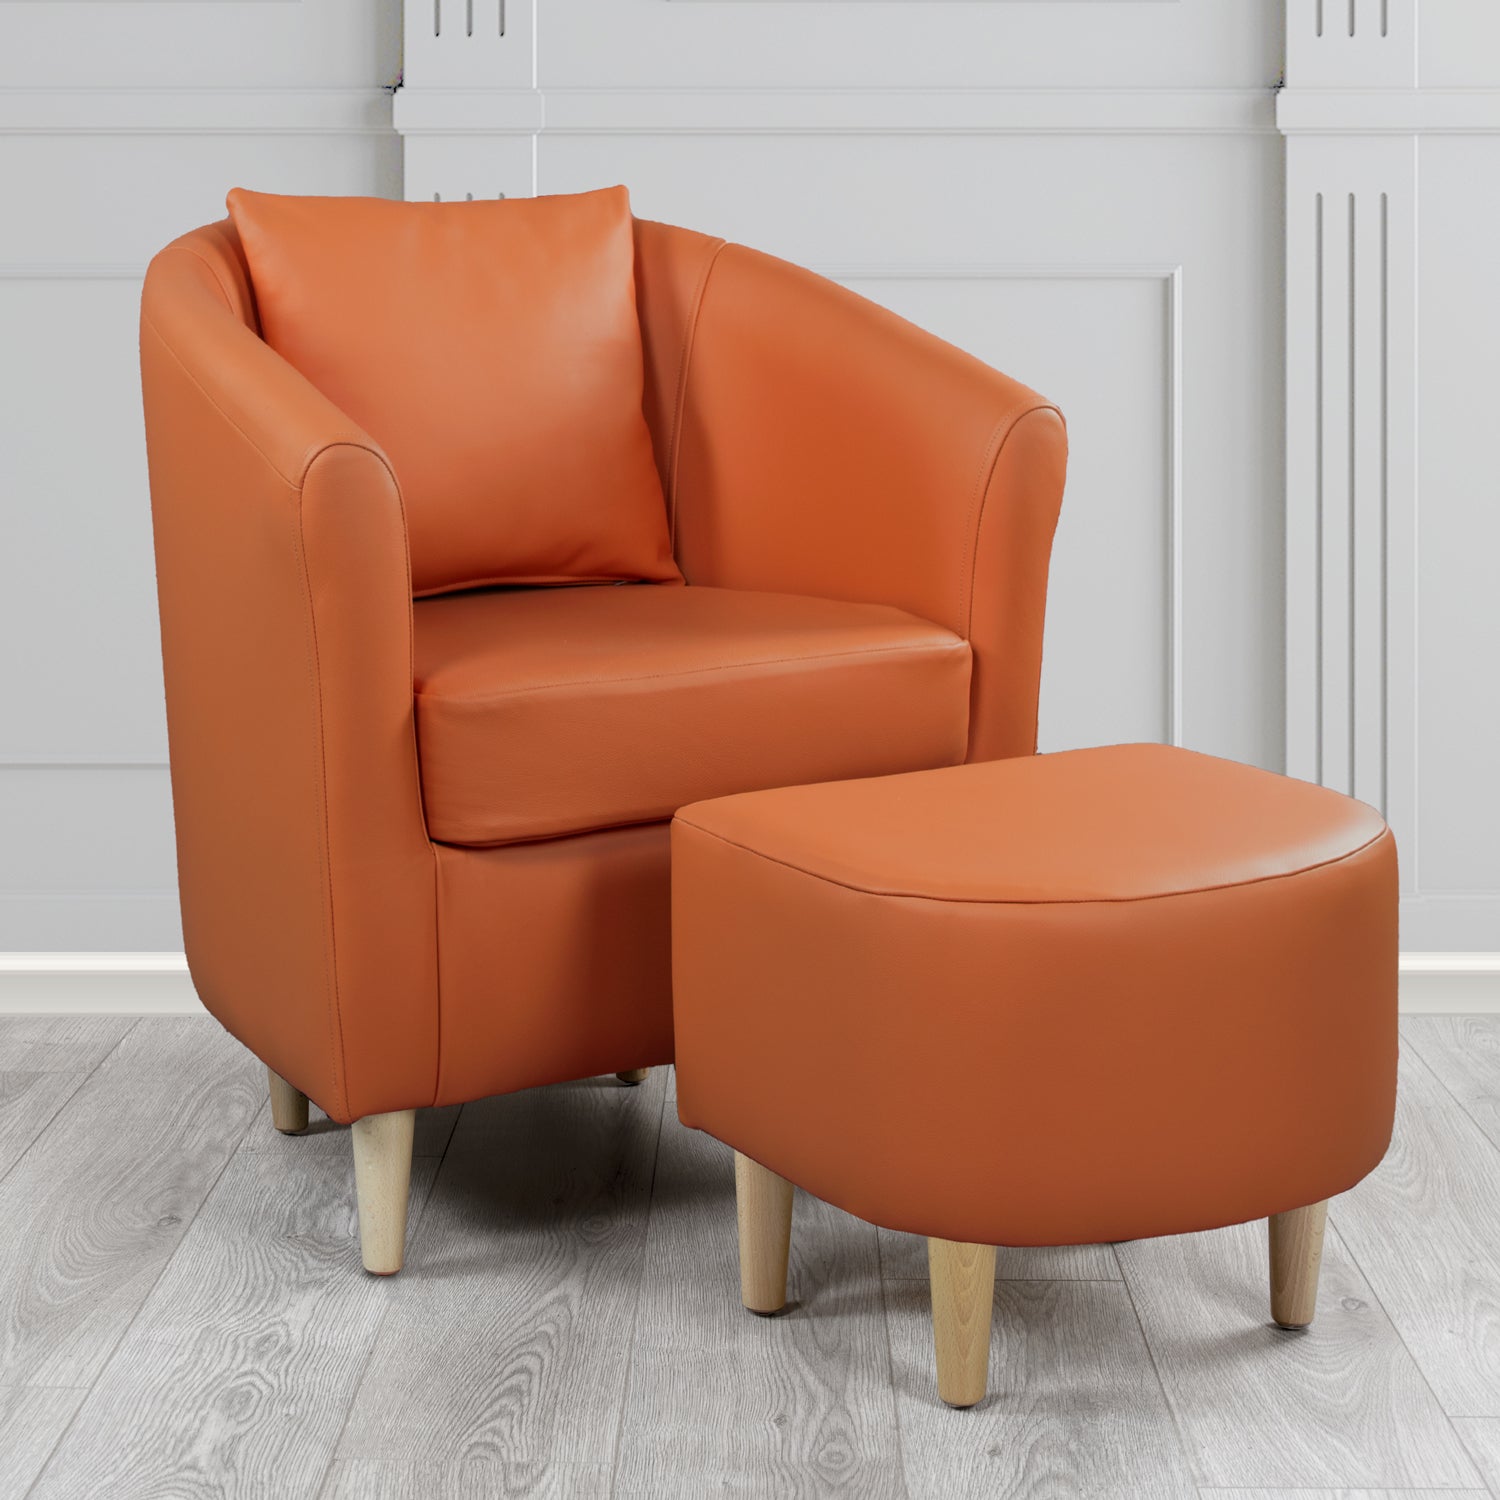 St Tropez Shelly Spice Grey Crib 5 Genuine Leather Tub Chair & Footstool Set With Scatter Cushion (6619536457770)